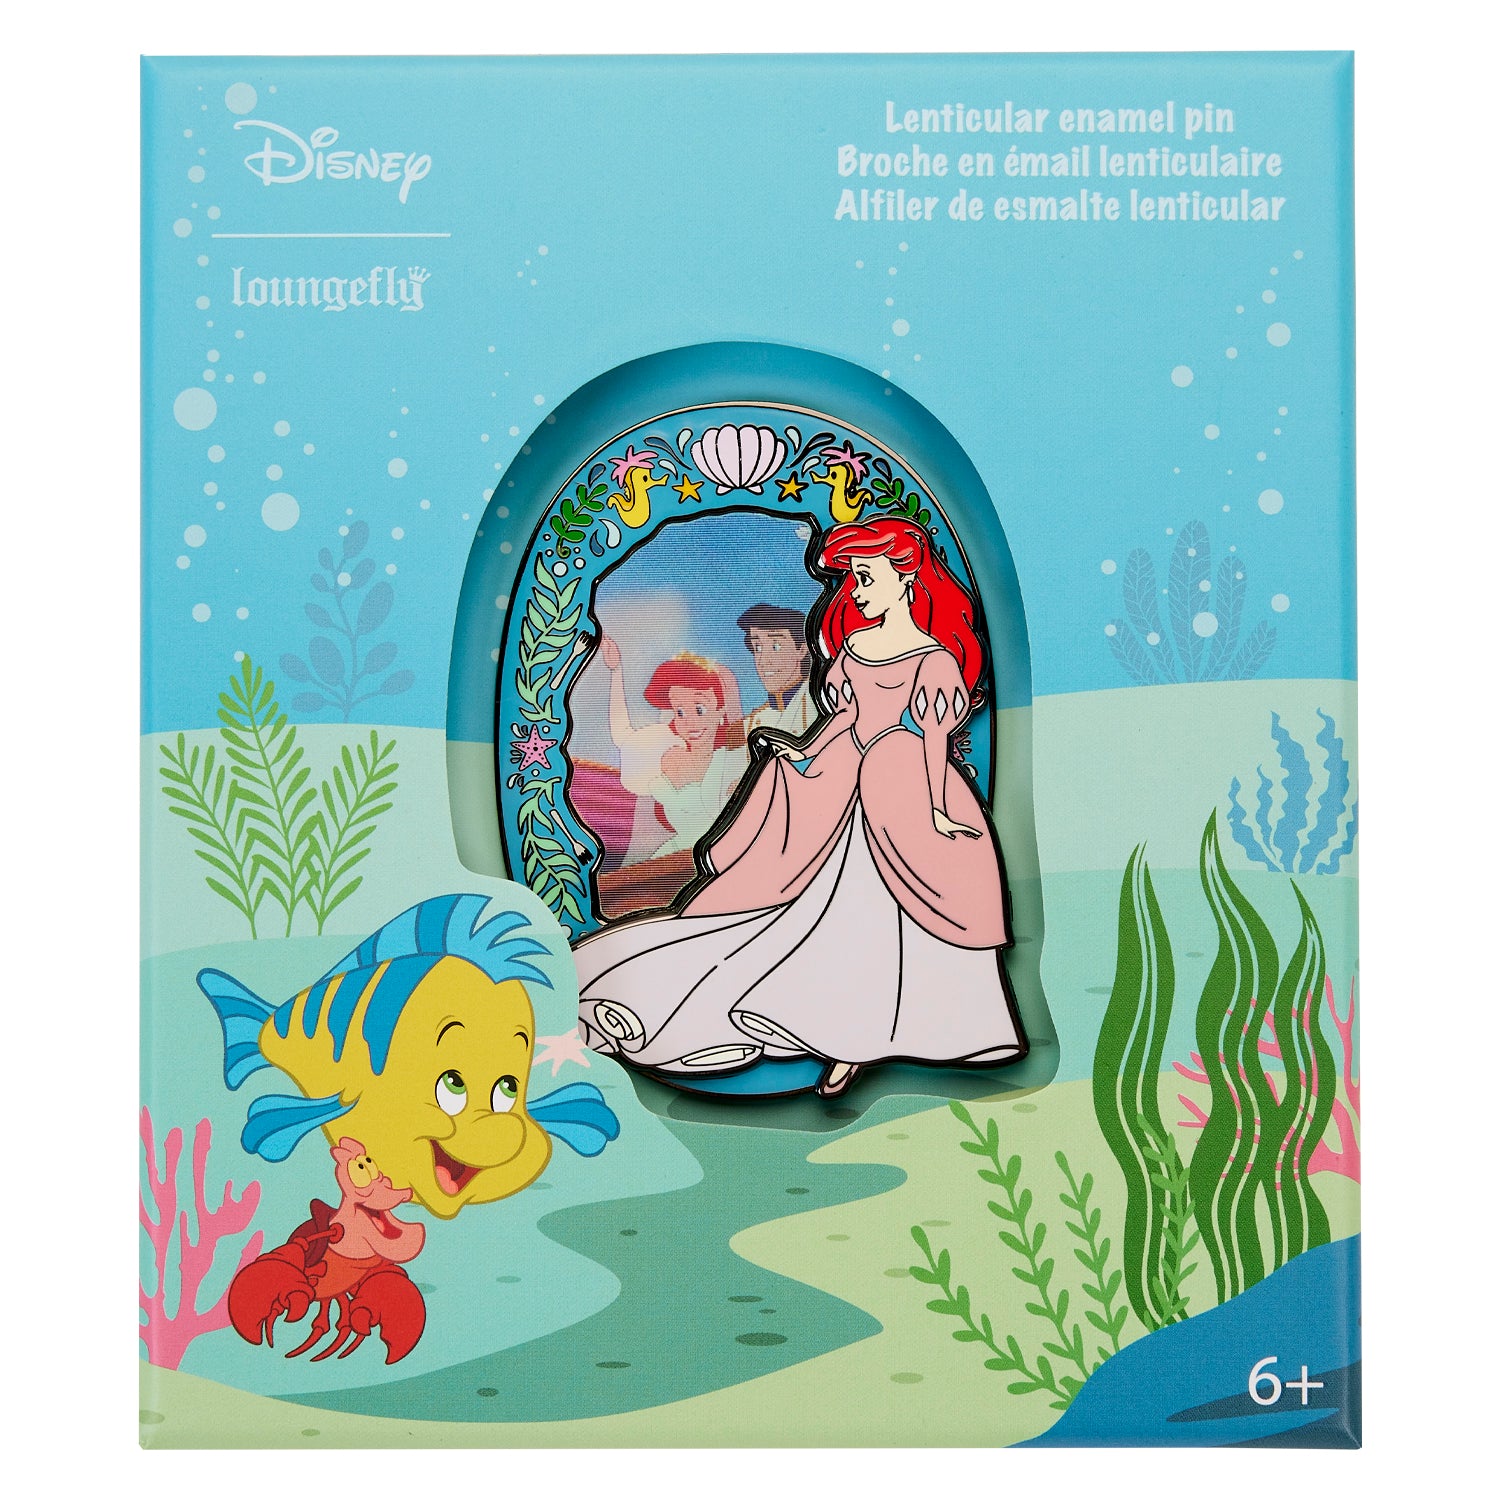 Loungefly Disney Little Mermaid Princess Lenticular 3" Limited Edition Collector Box Pin